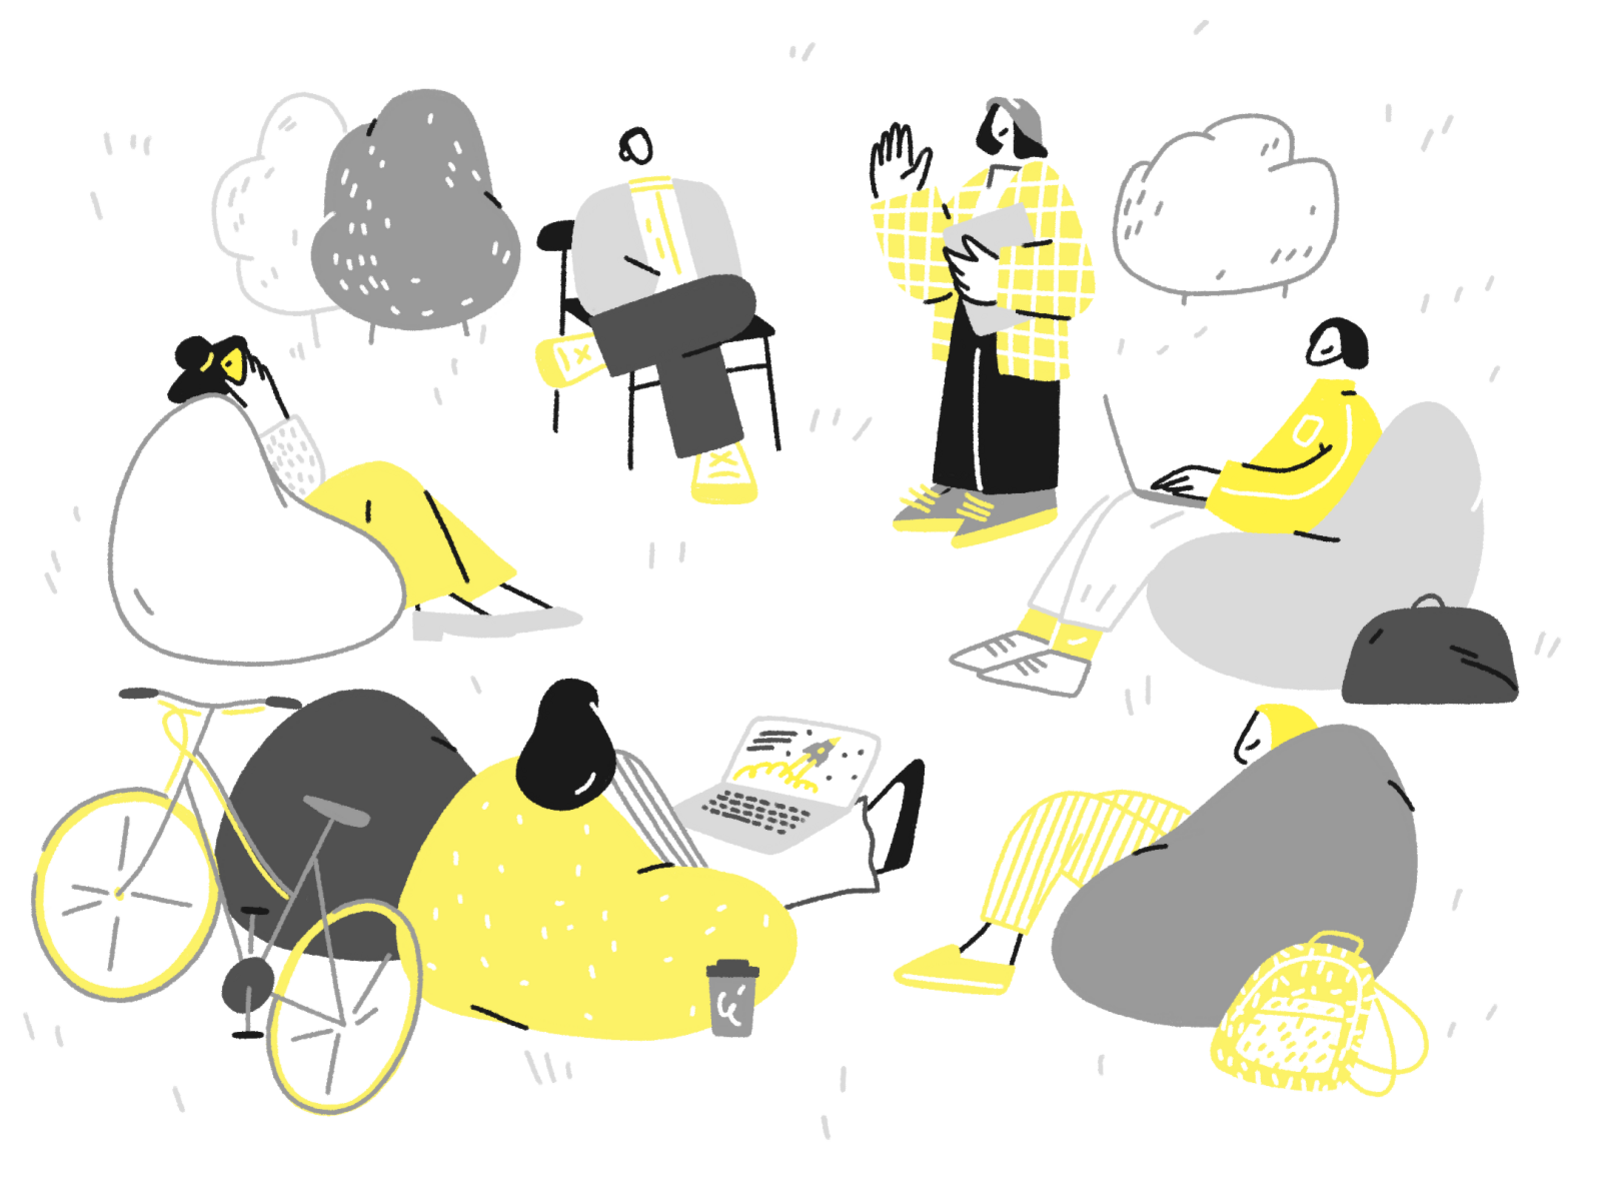 Park coworking bike business character design illustration magazine moscow nature procreate russia startup team travel work